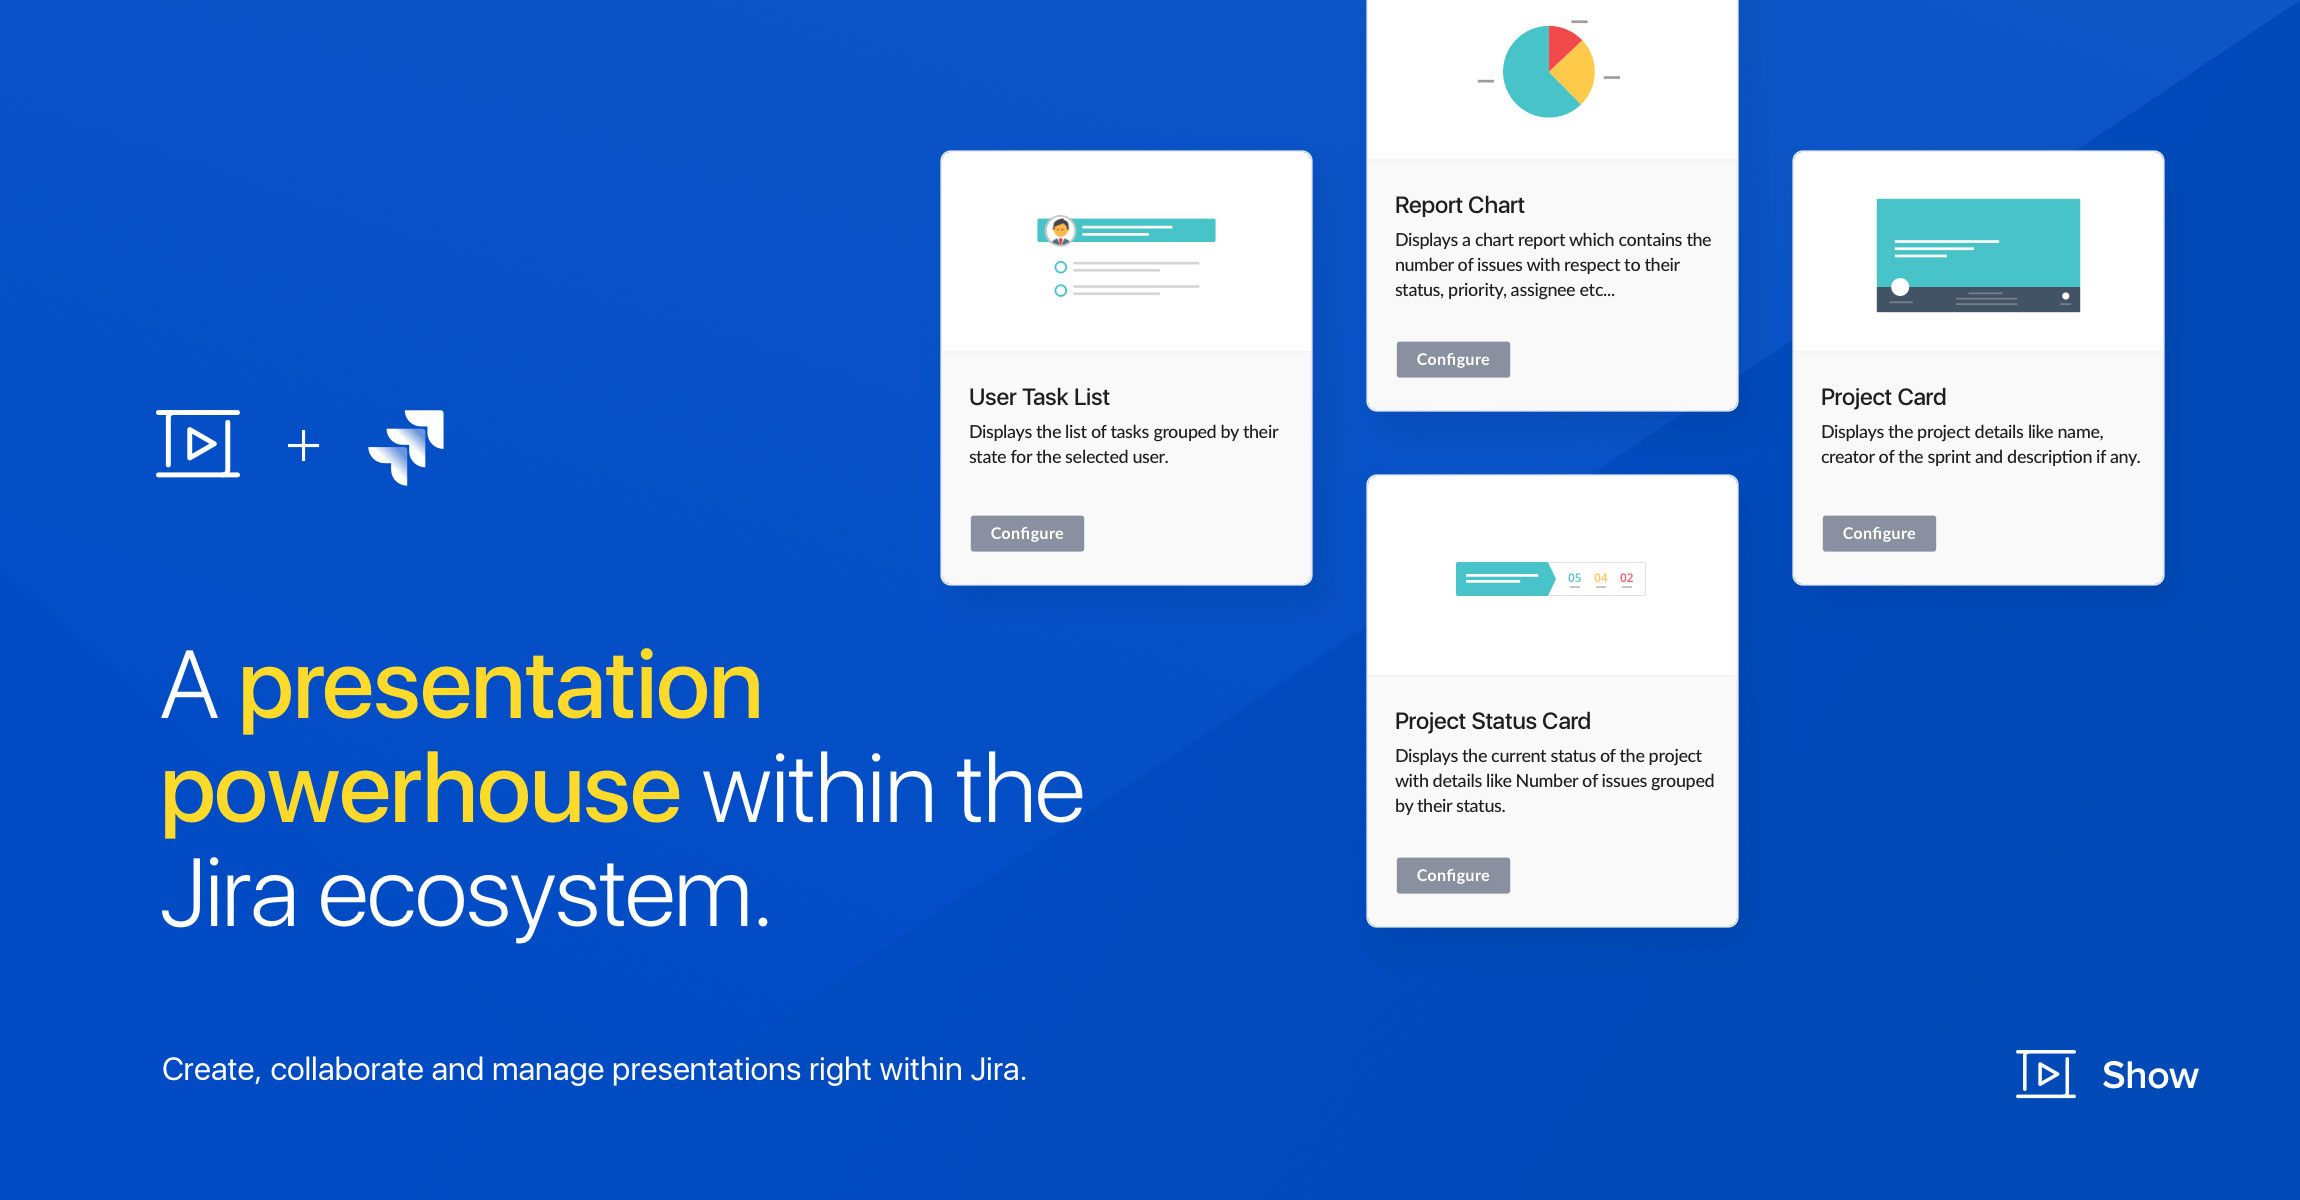 Introducing Zoho Show for Jira: A presentation tool for all your project management needs